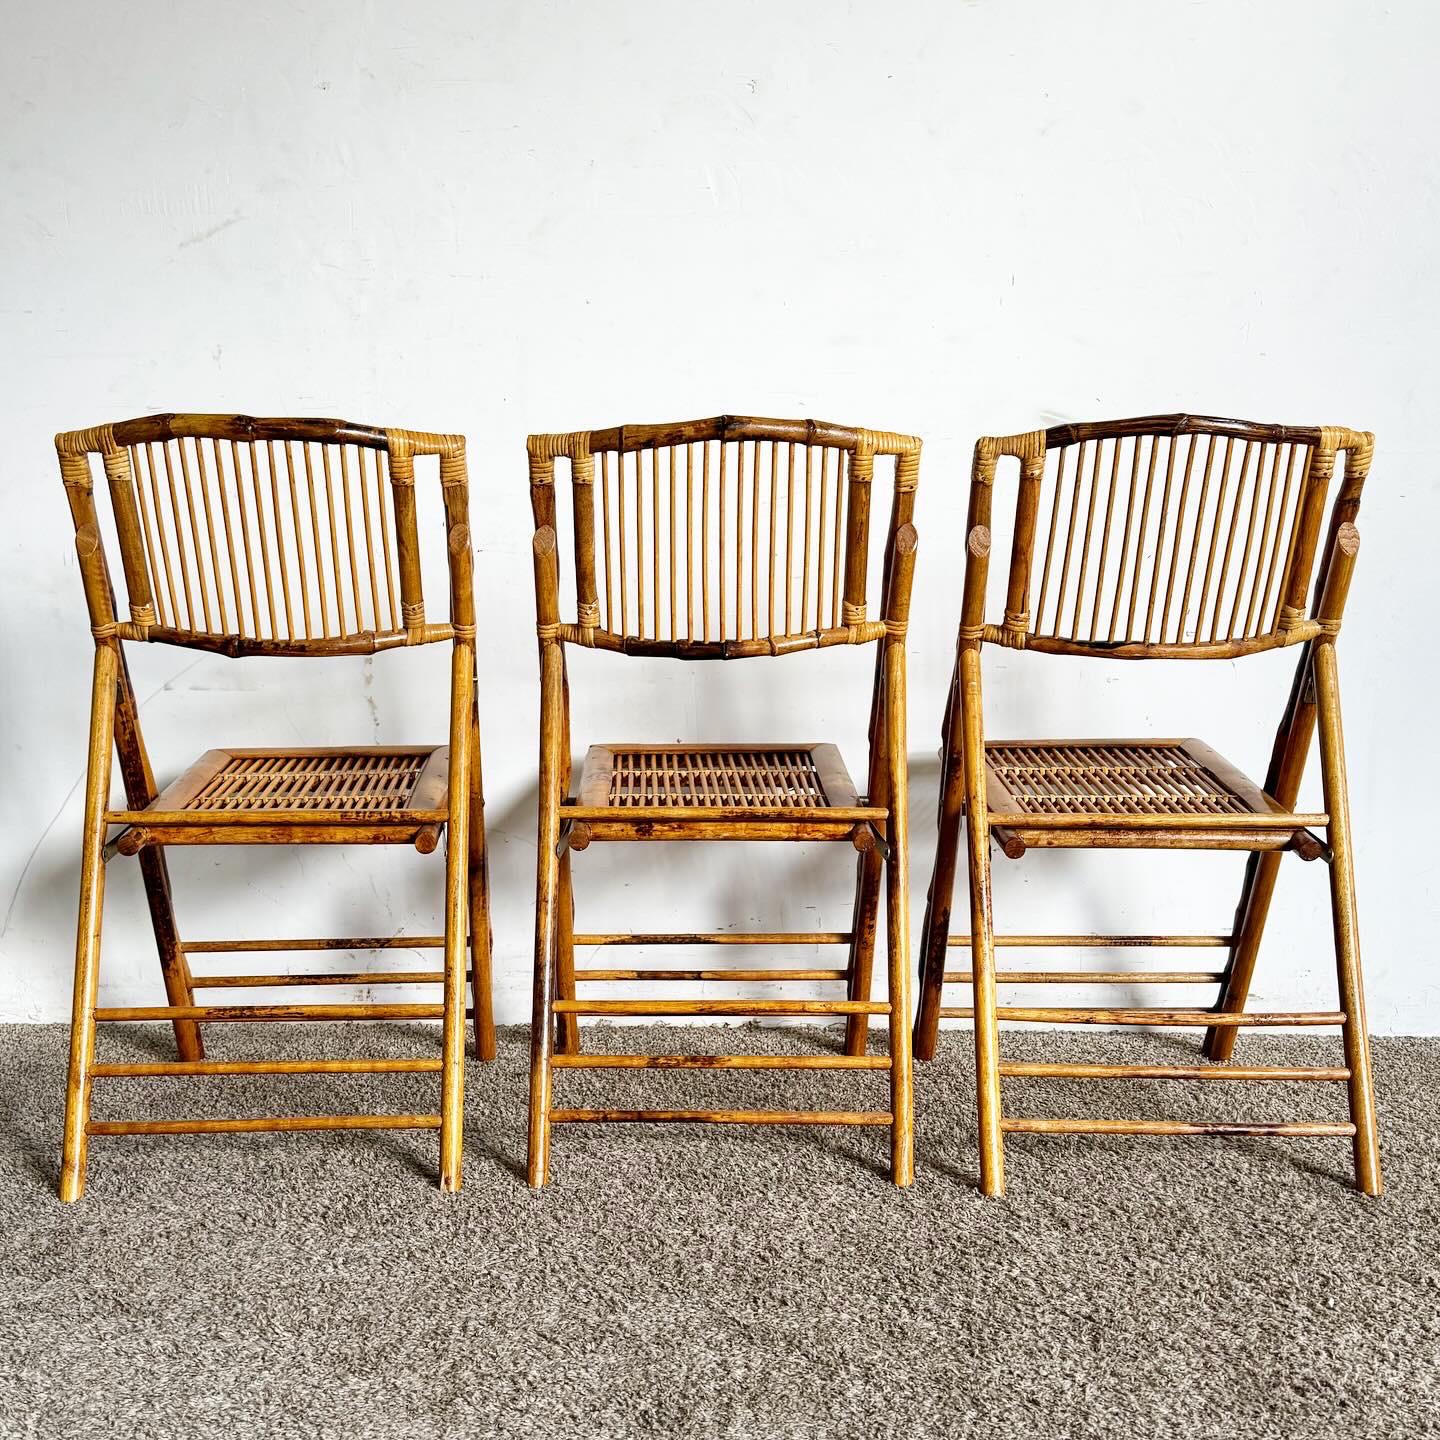 Boho Chic Tortoise Shell Bamboo Rattan Fold-Up Dining Chairs - Set of 3 For Sale 1